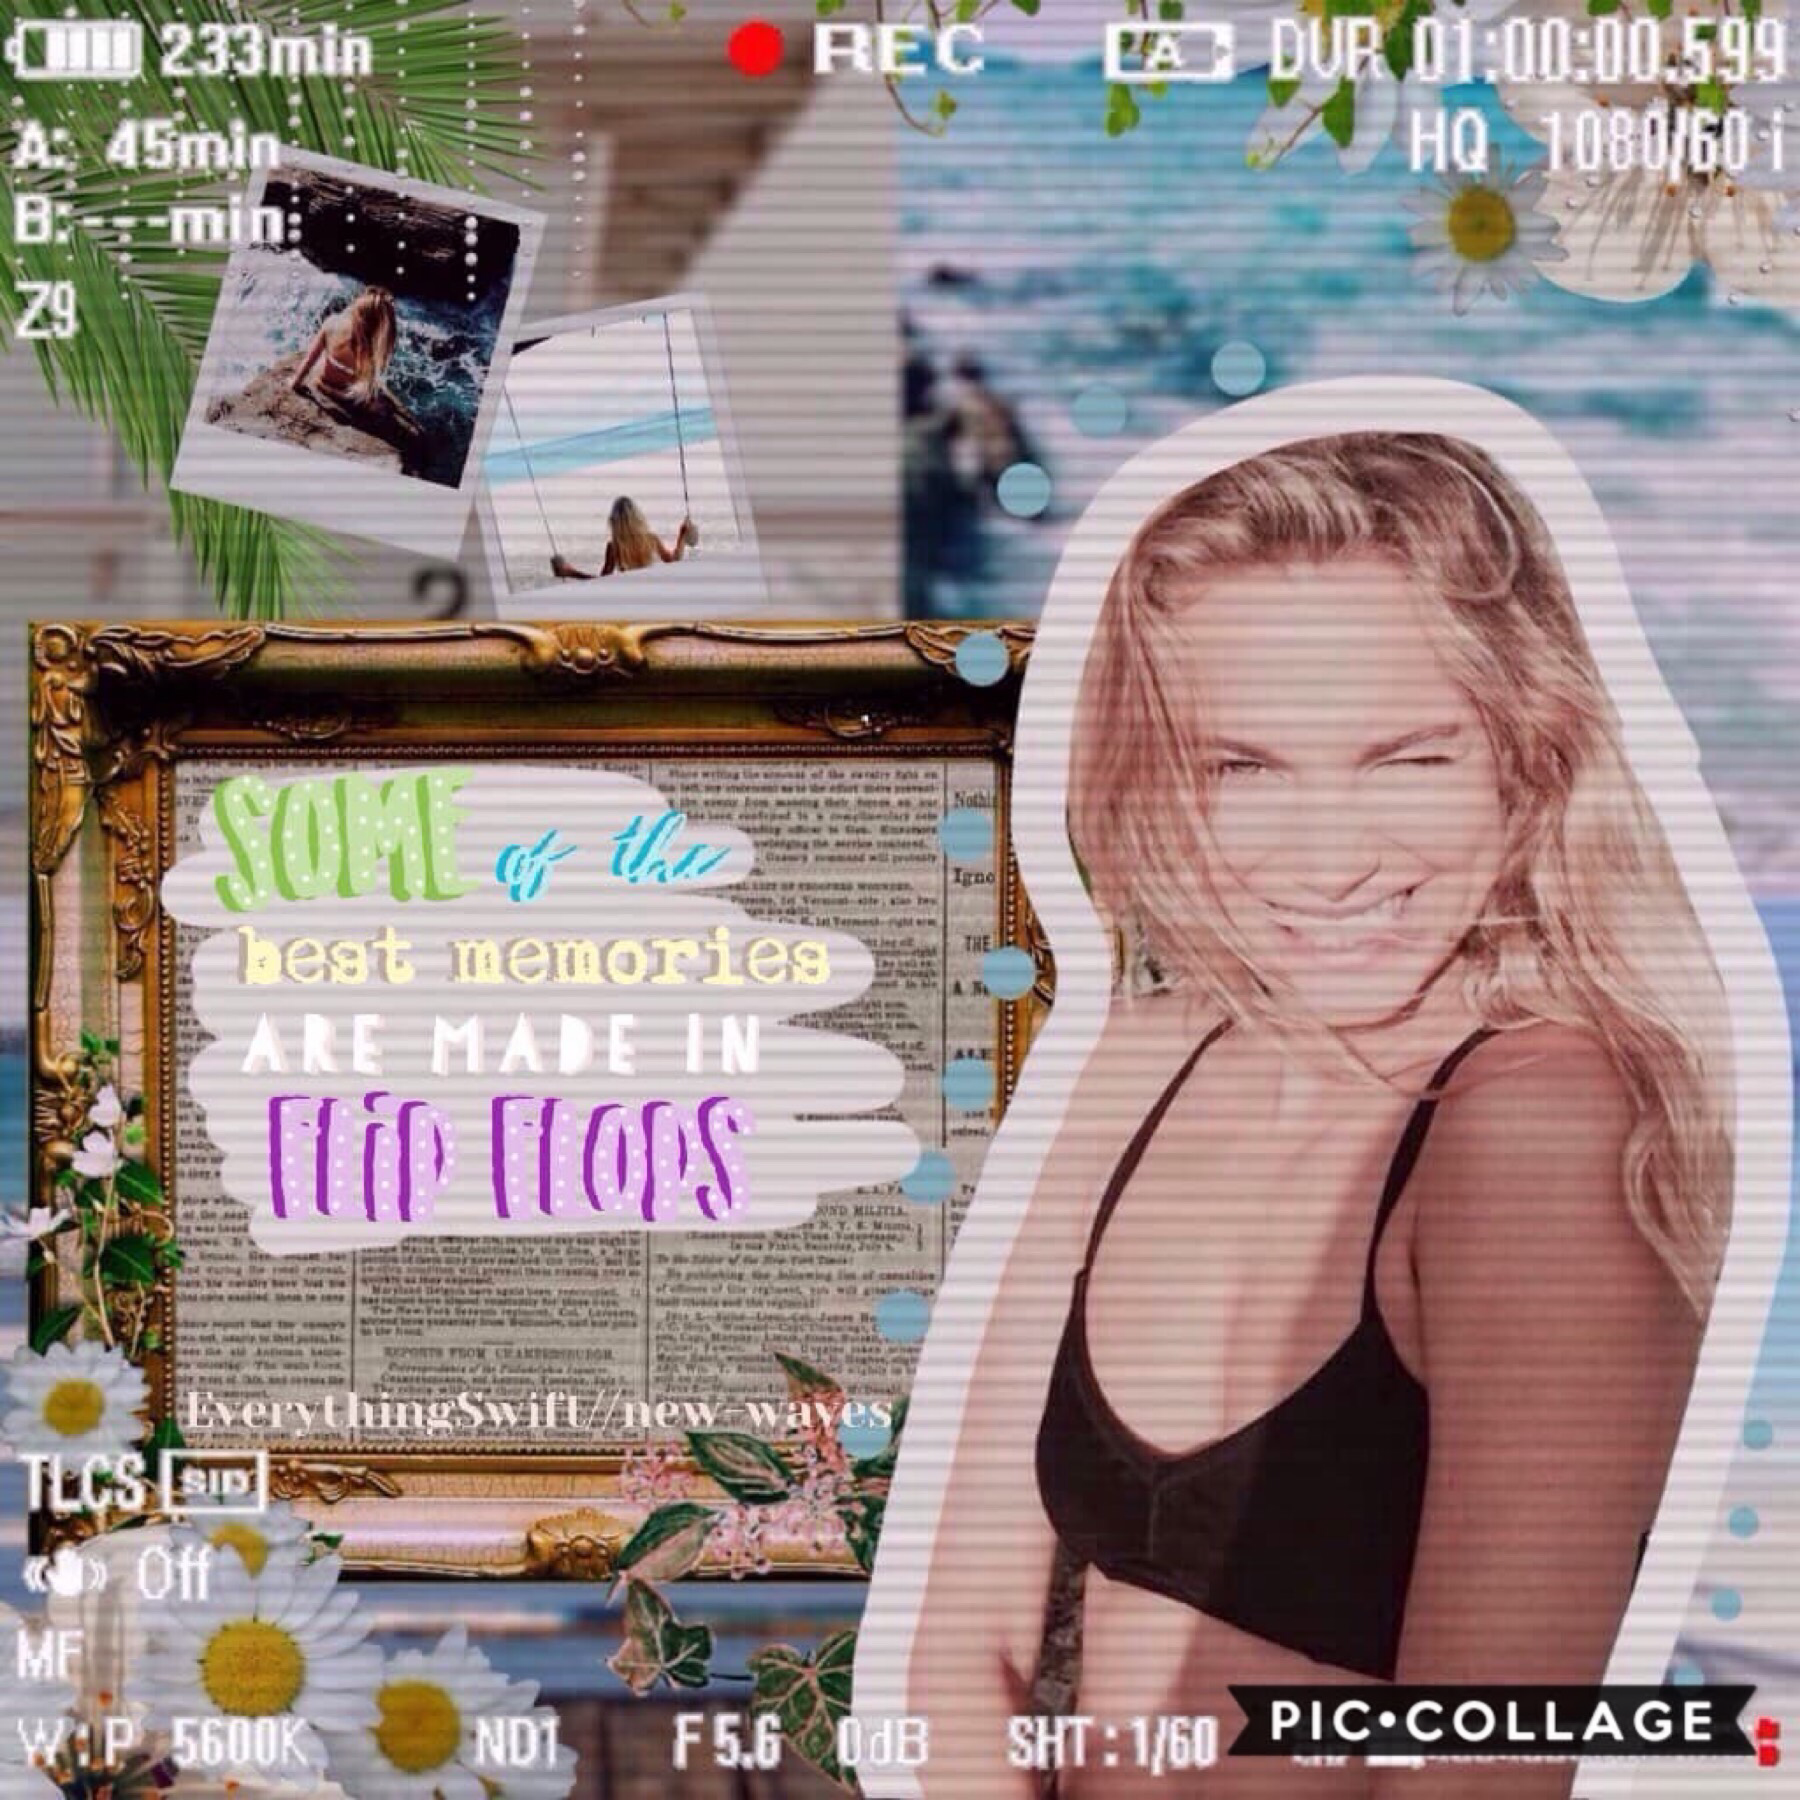 Collab With🥁...
Everythingswift!!💓she’s so sweet and is so good at making collages, go follow her!!! QOTD: What’s your favorite style of shoe? AOTD: sandals!💓🌟have a great day🌸🌼